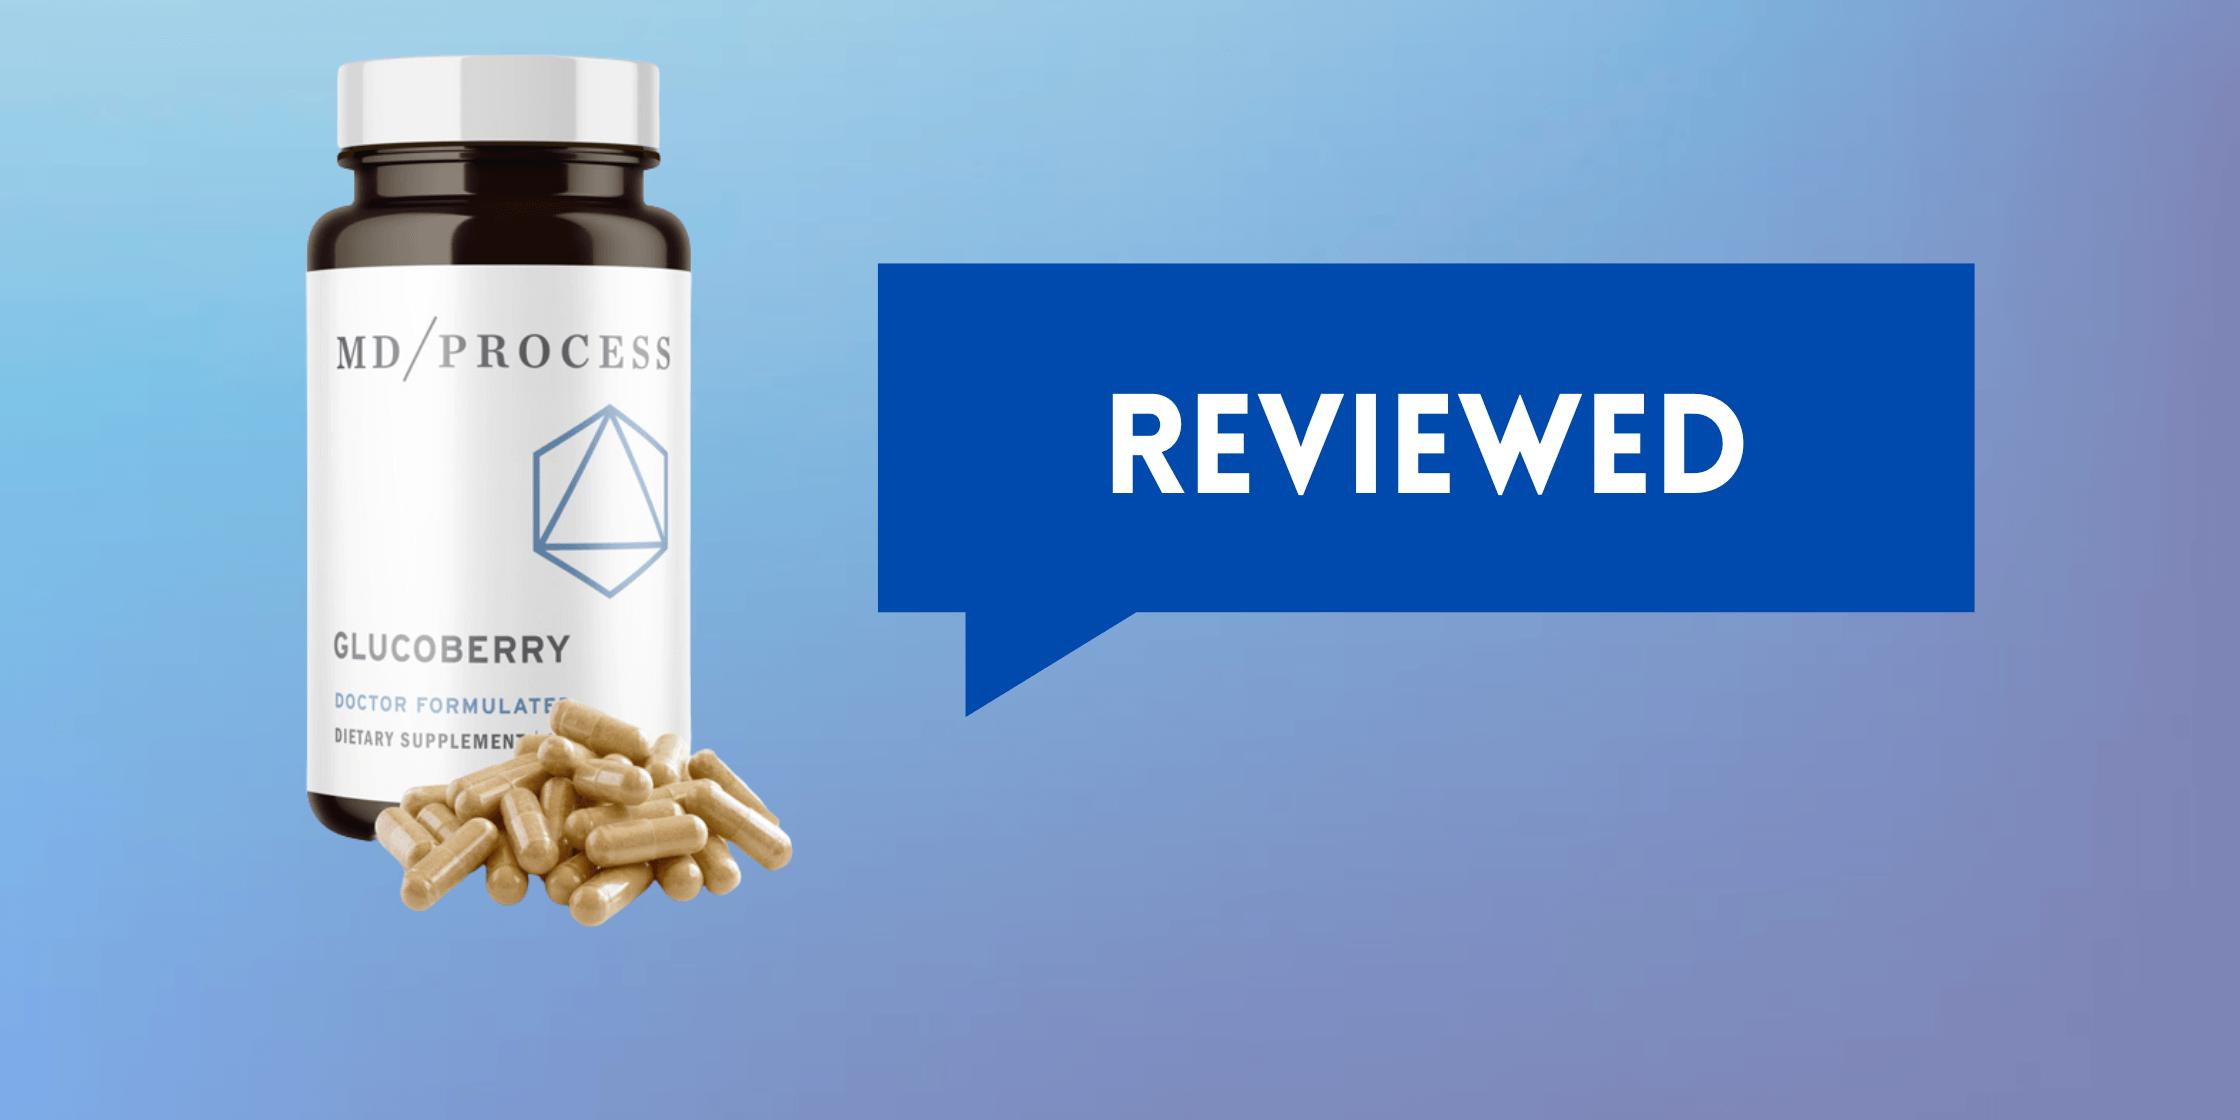 GlucoBerry Reviews Users’ Shocked on Result-Should You Buy MD/Process Formula?